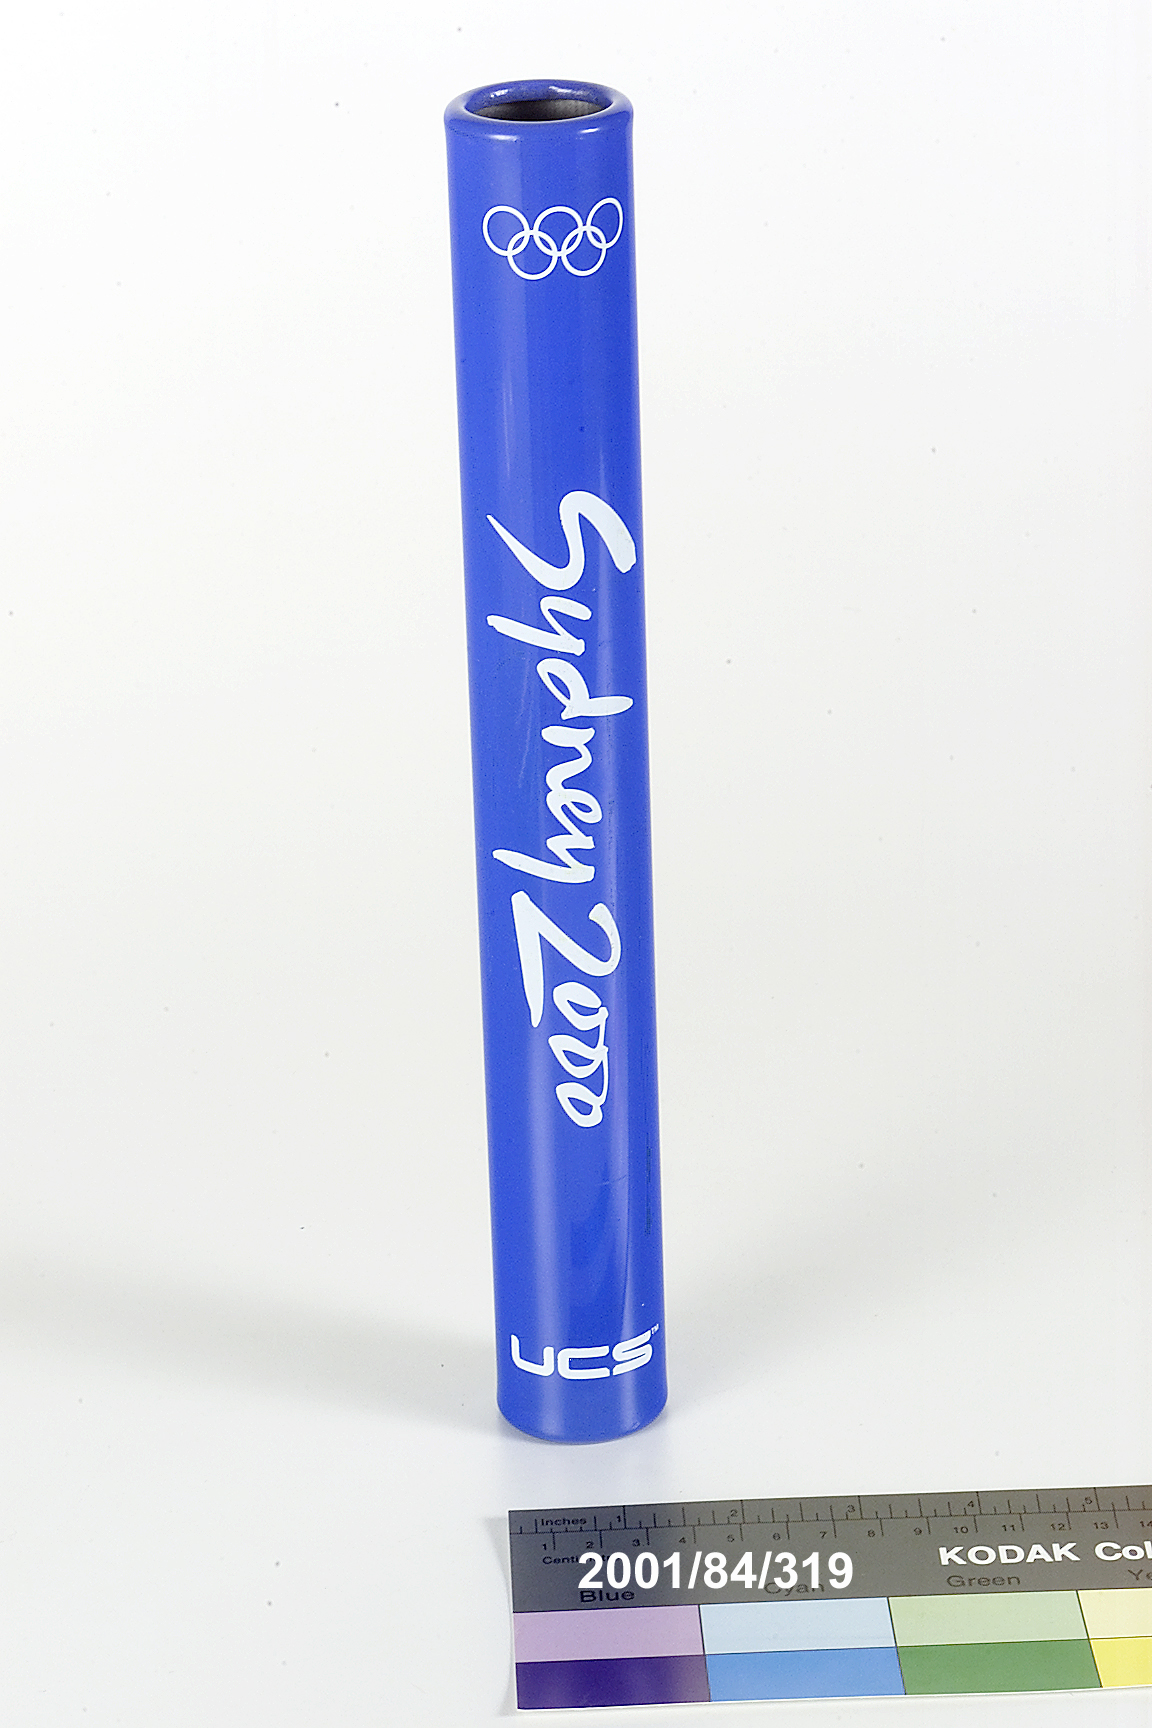 Relay batons made for the Sydney 2000 Olympic Games